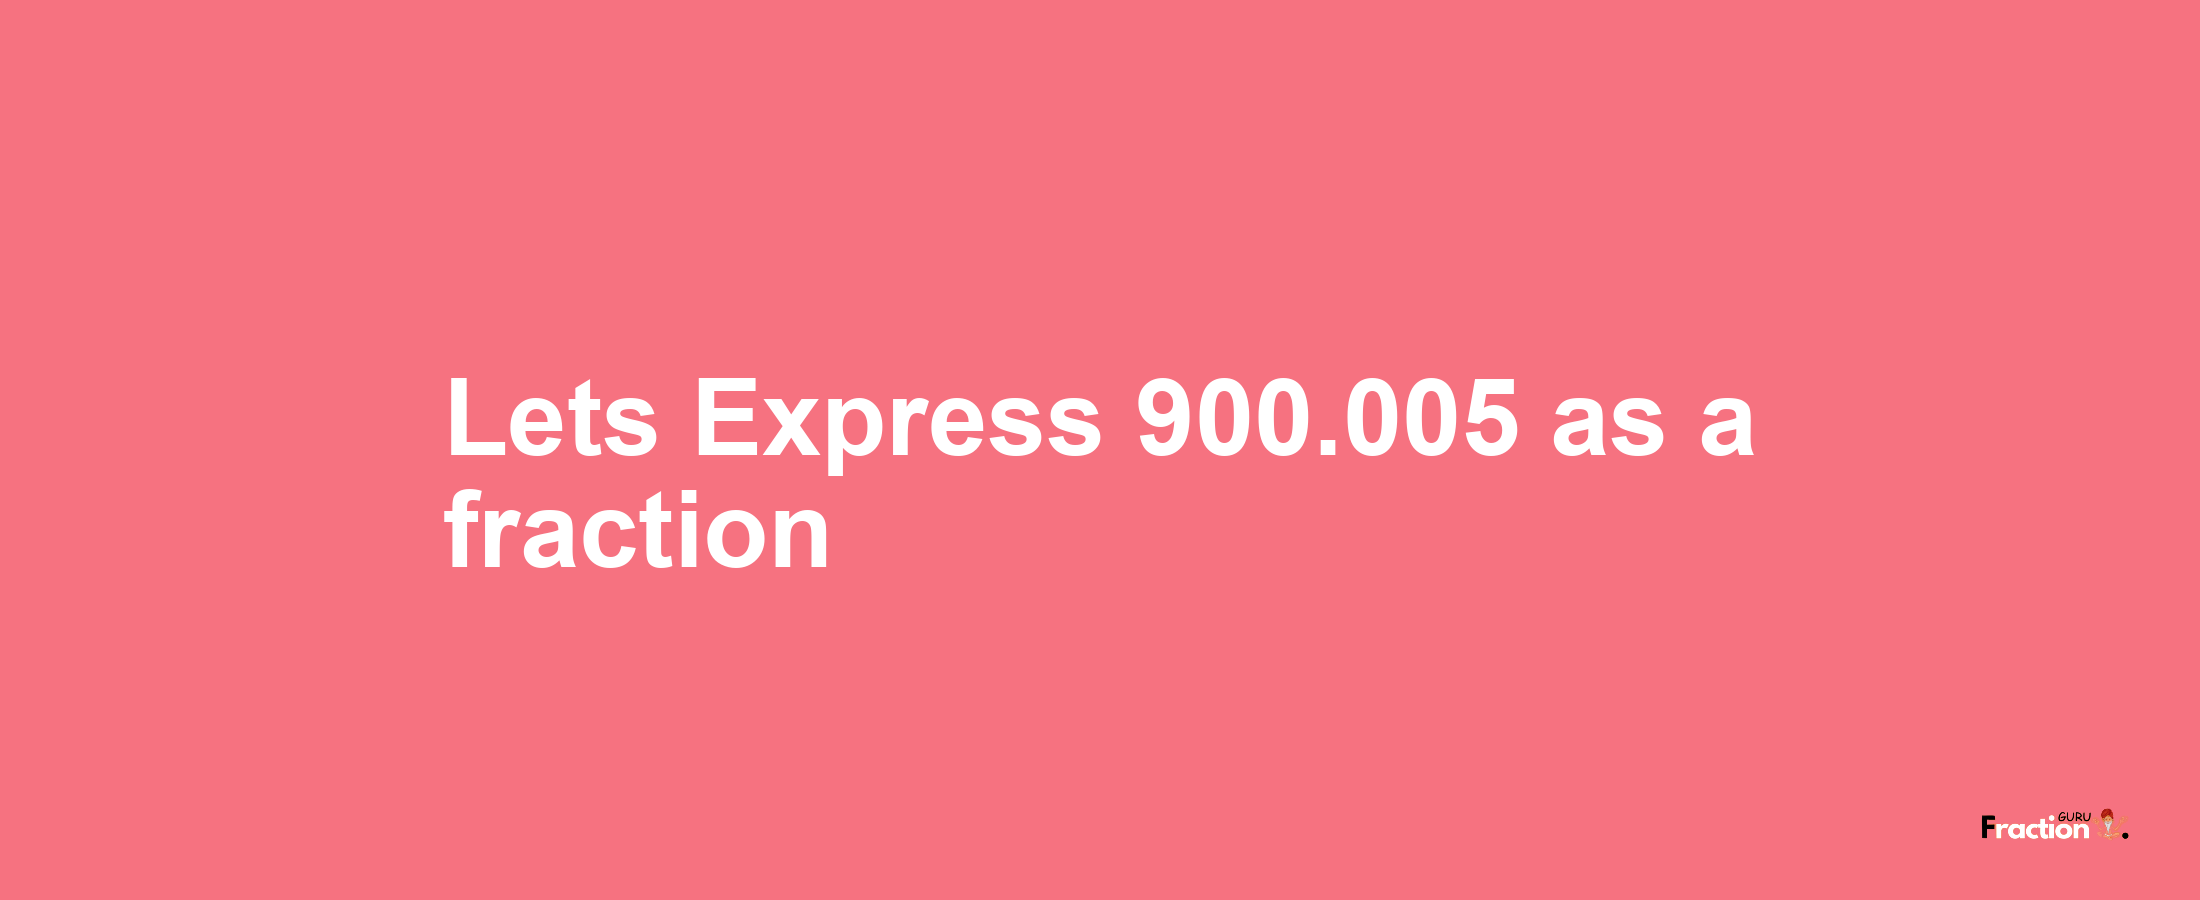 Lets Express 900.005 as afraction